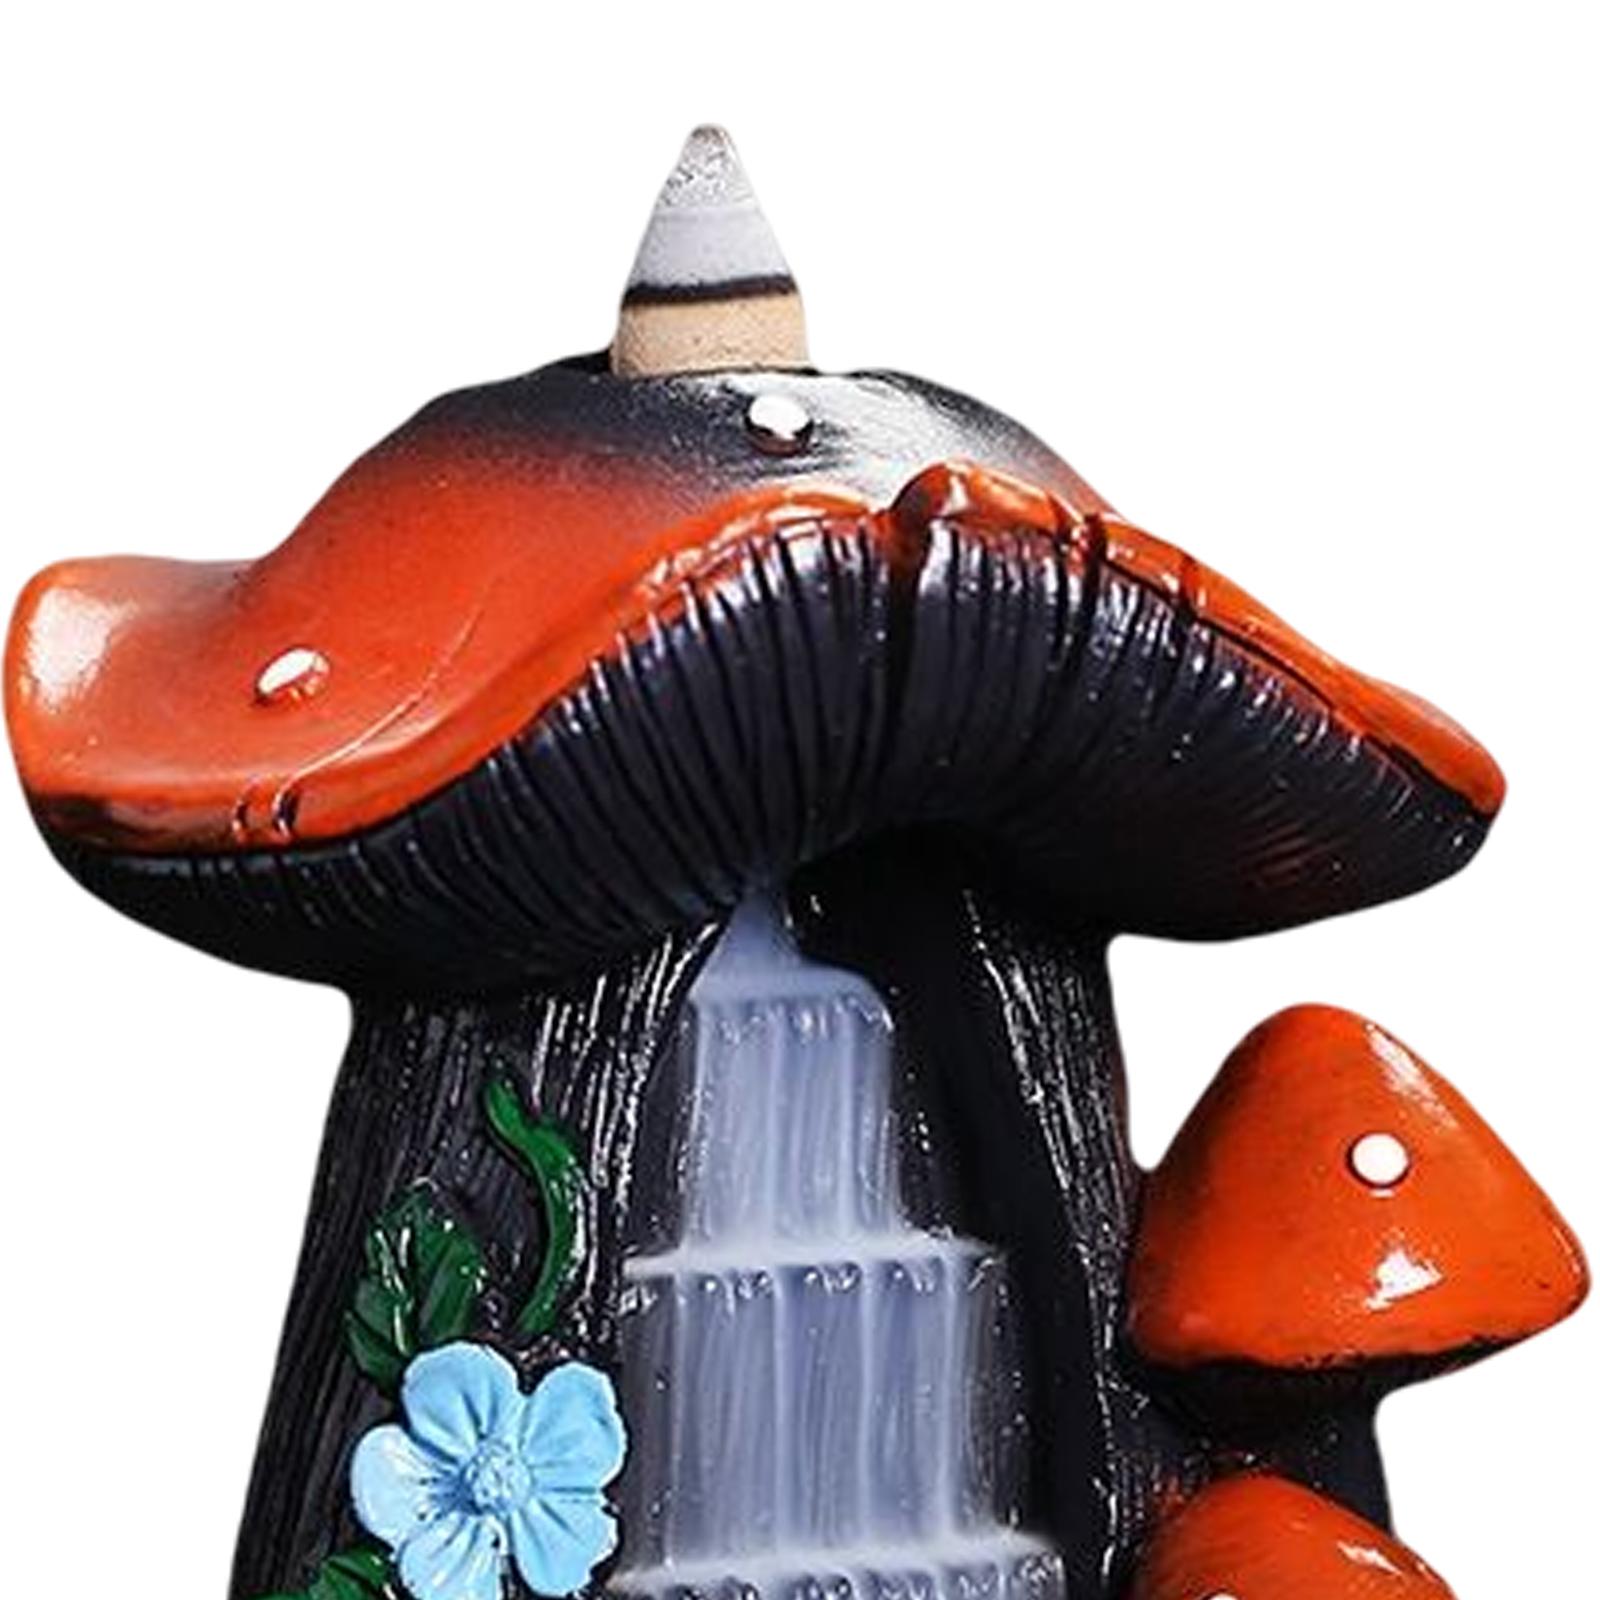 Waterfall Holder Home Decor Burner Stand Statue Backflow - image 3 of 6